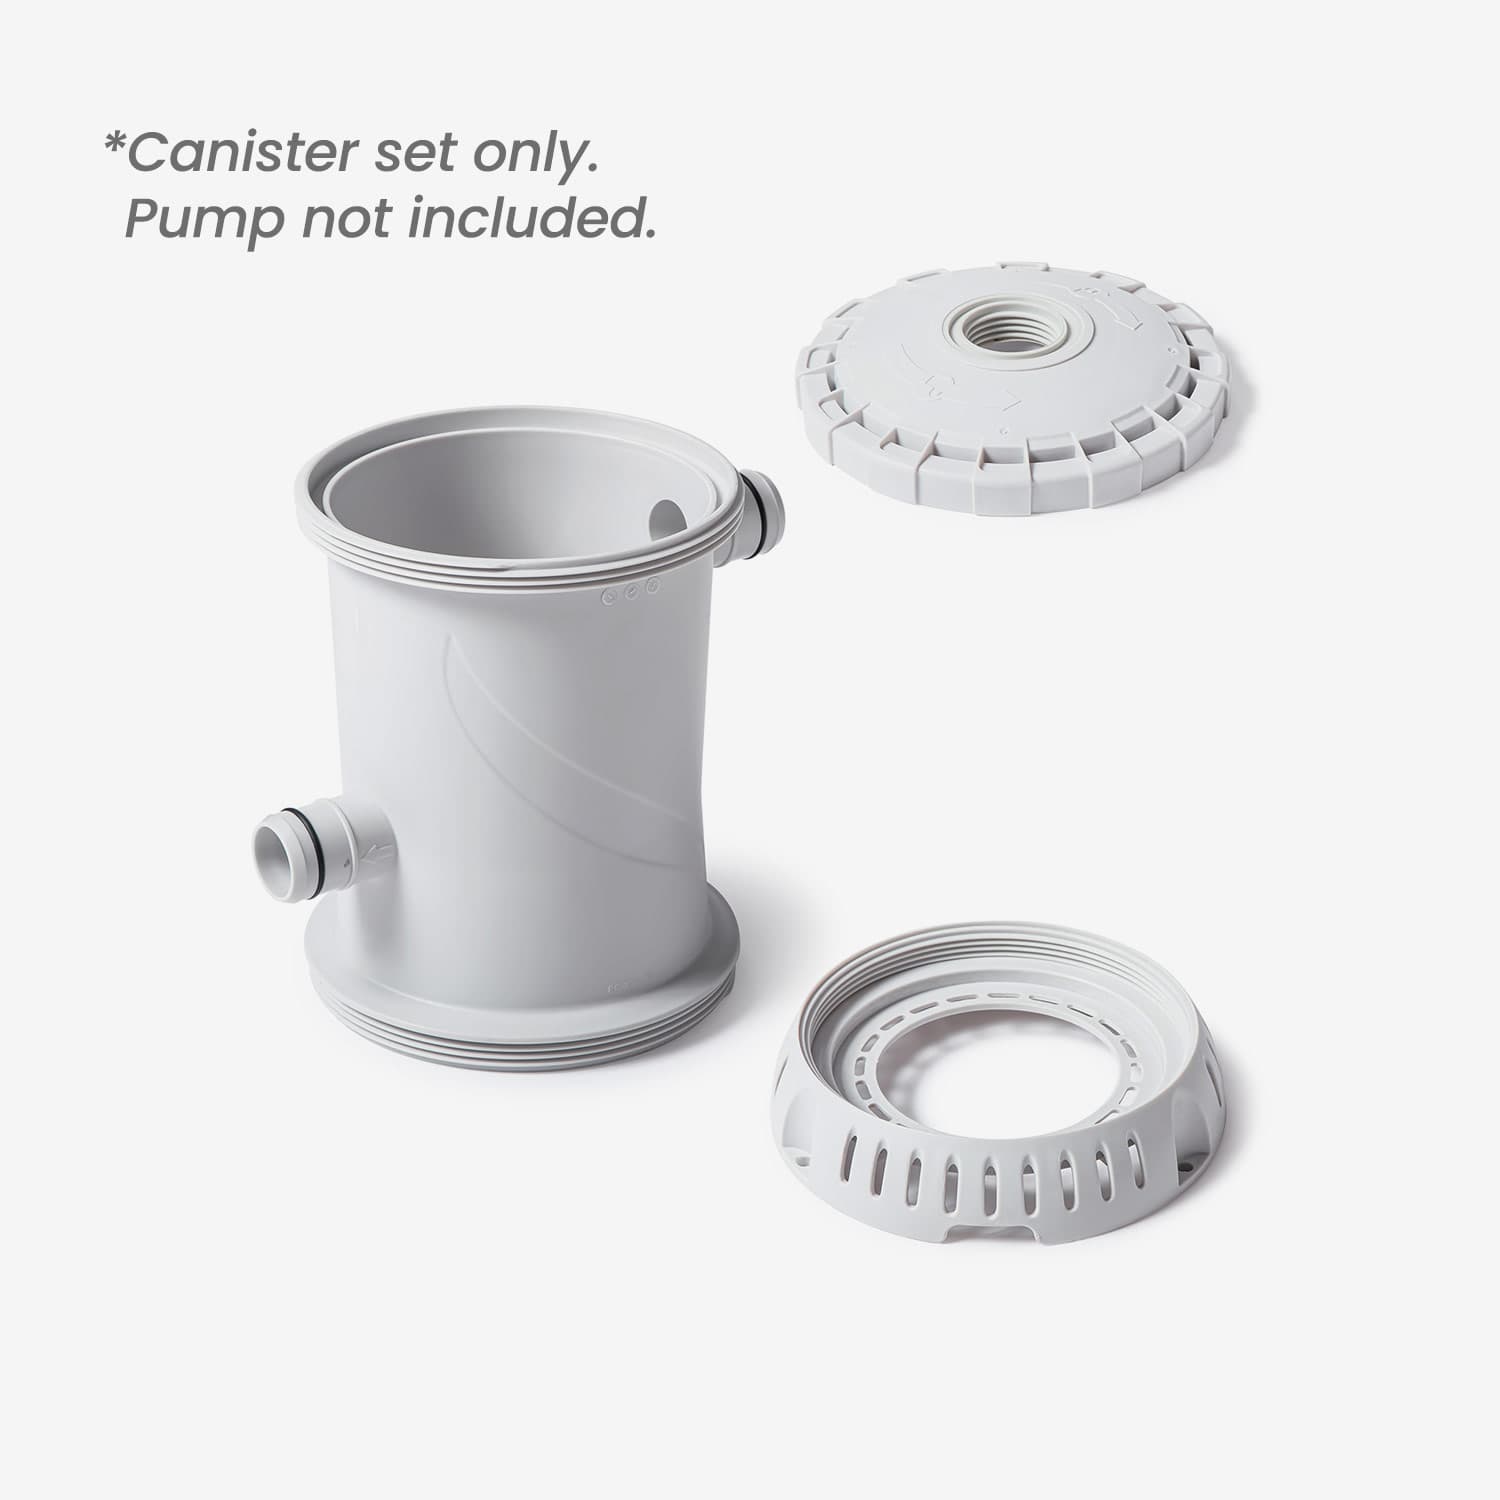 Funsicle RX600 Filter Pump Canister Set